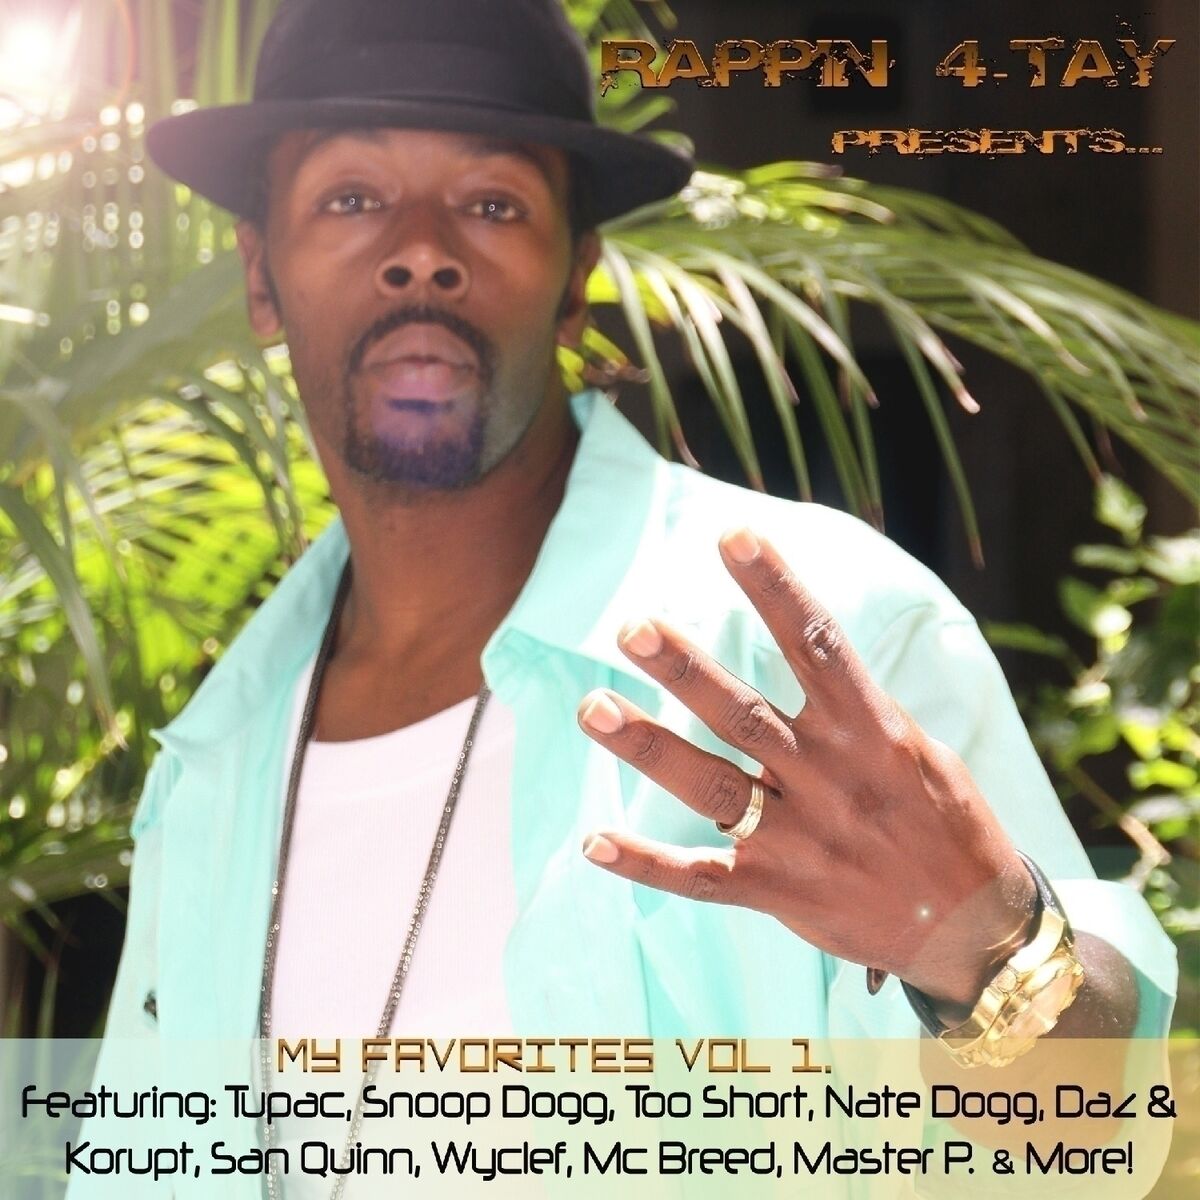 Rappin' 4-Tay: albums, songs, playlists | Listen on Deezer